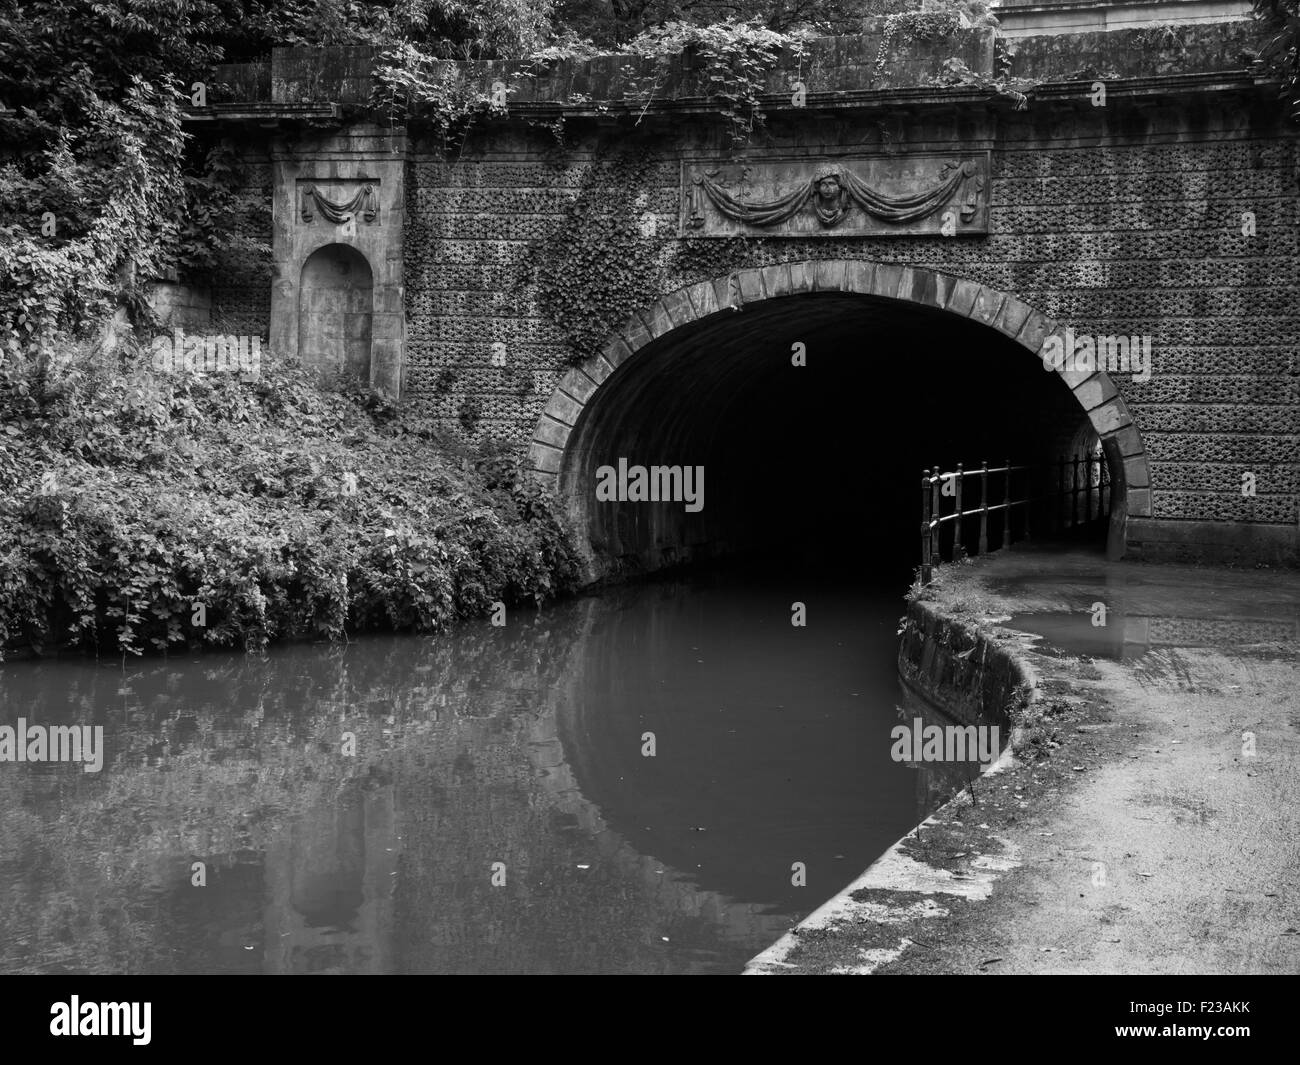 image of the Kennet and Avon canal at Bath Stock Photo